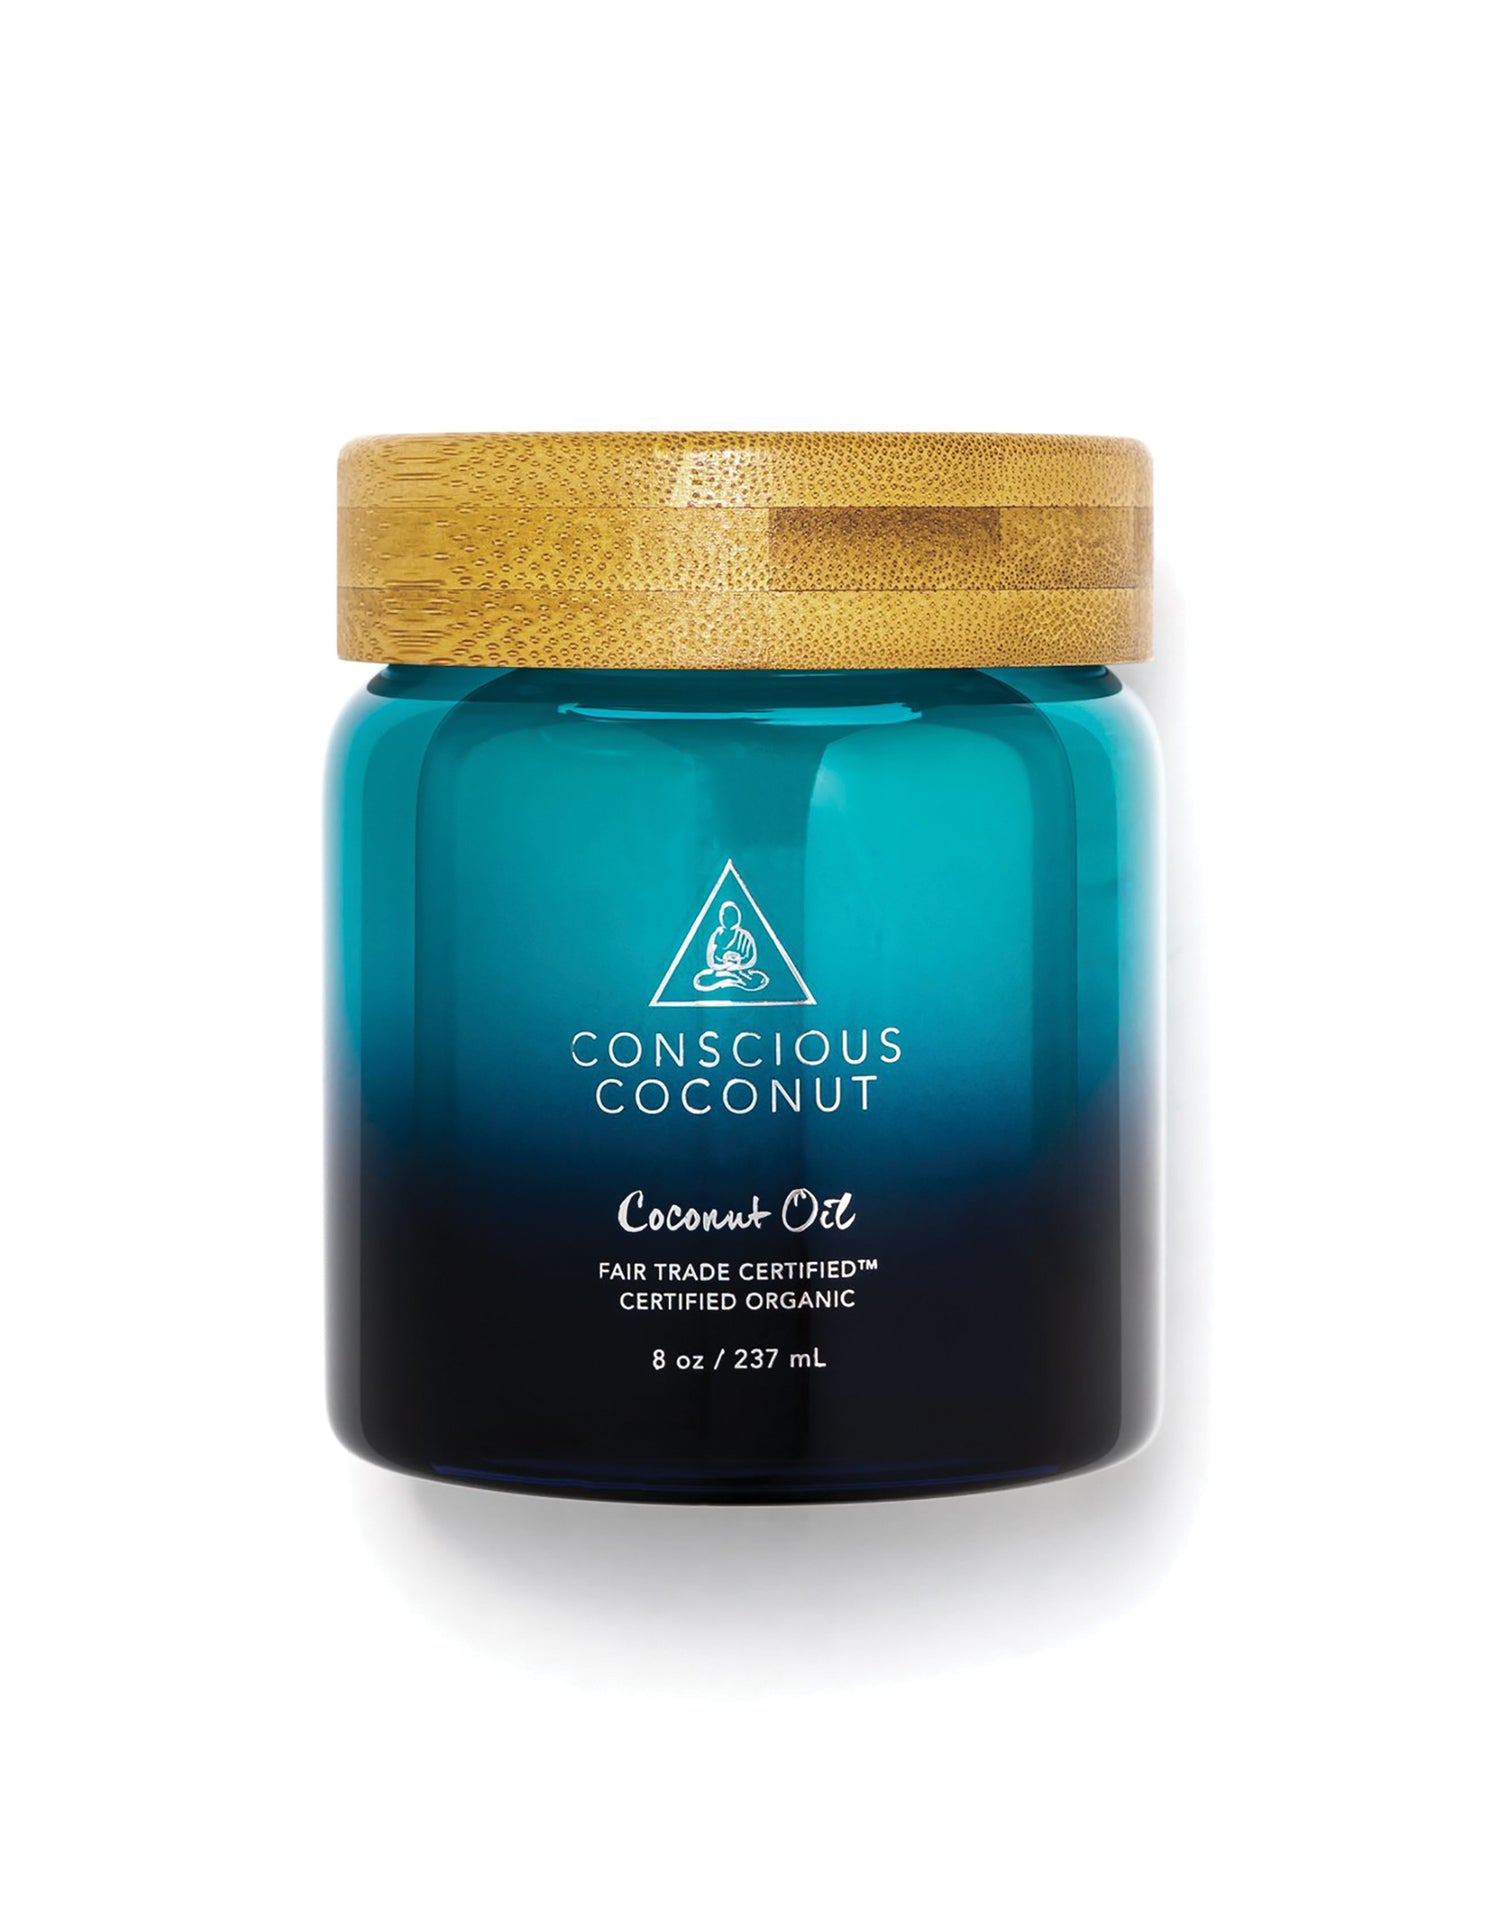 Conscious Coconut Oil Jar - product view